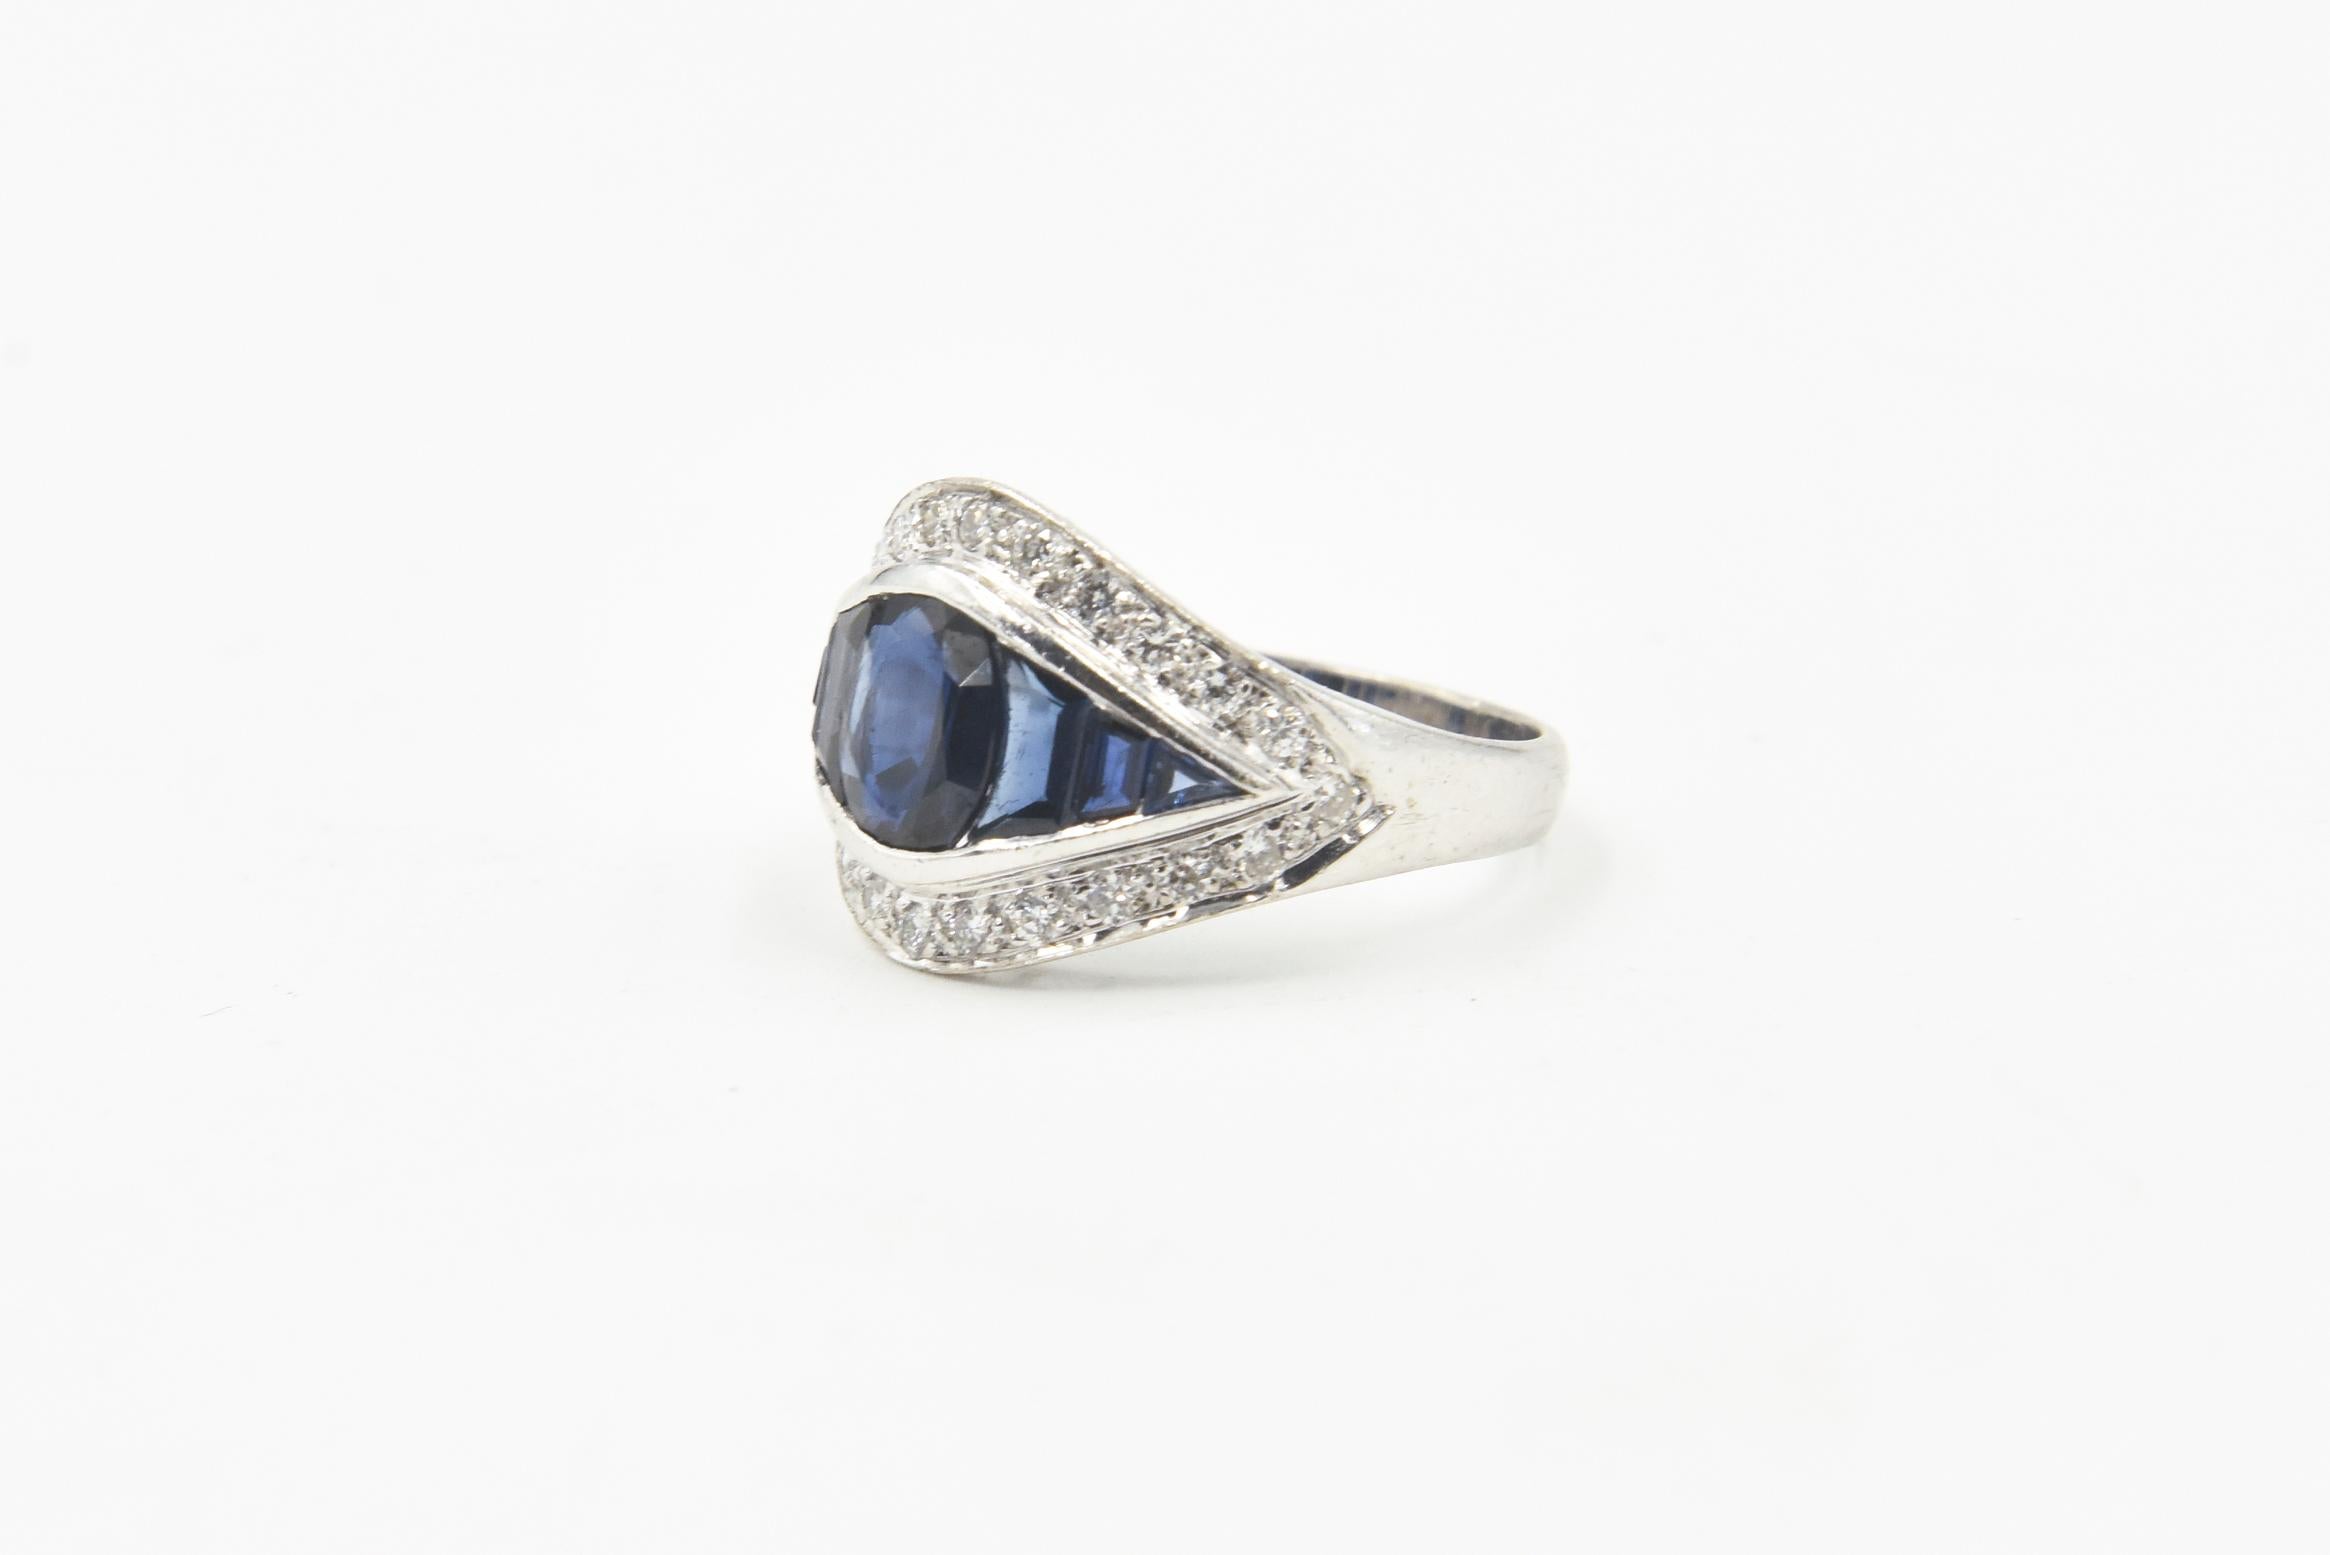 Art Deco-style cocktail ring featuring an oval faceted sapphire set beside graduating channel-set sapphires within a diamond frame. The mounting is 18k white gold.  
Marked: 18K.
 Size: US 6 3/4; can be sized.